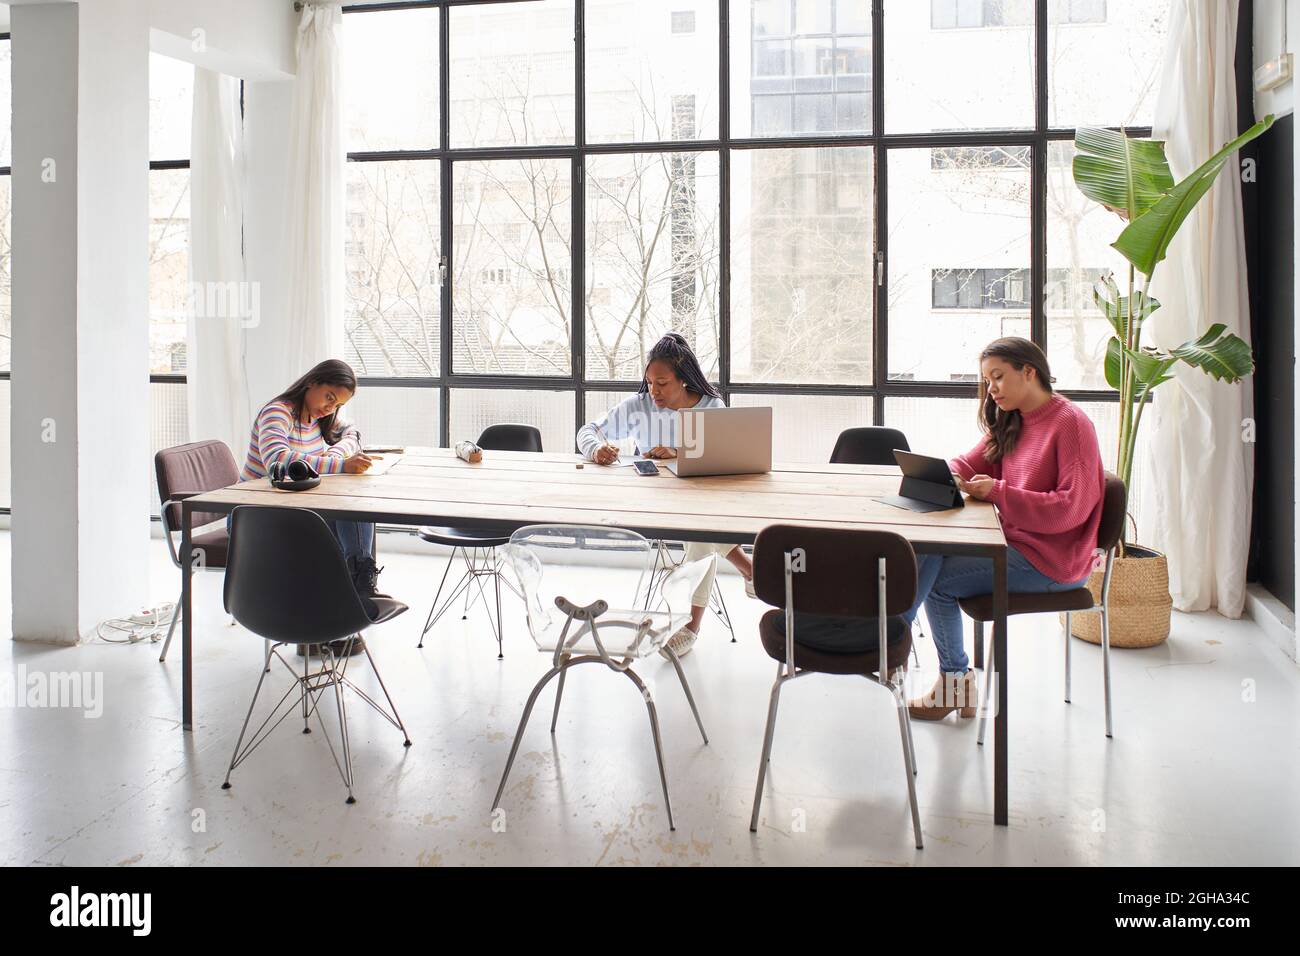 In the office. Three businesswomen work together without masks while keeping a safe distance. Stock Photo